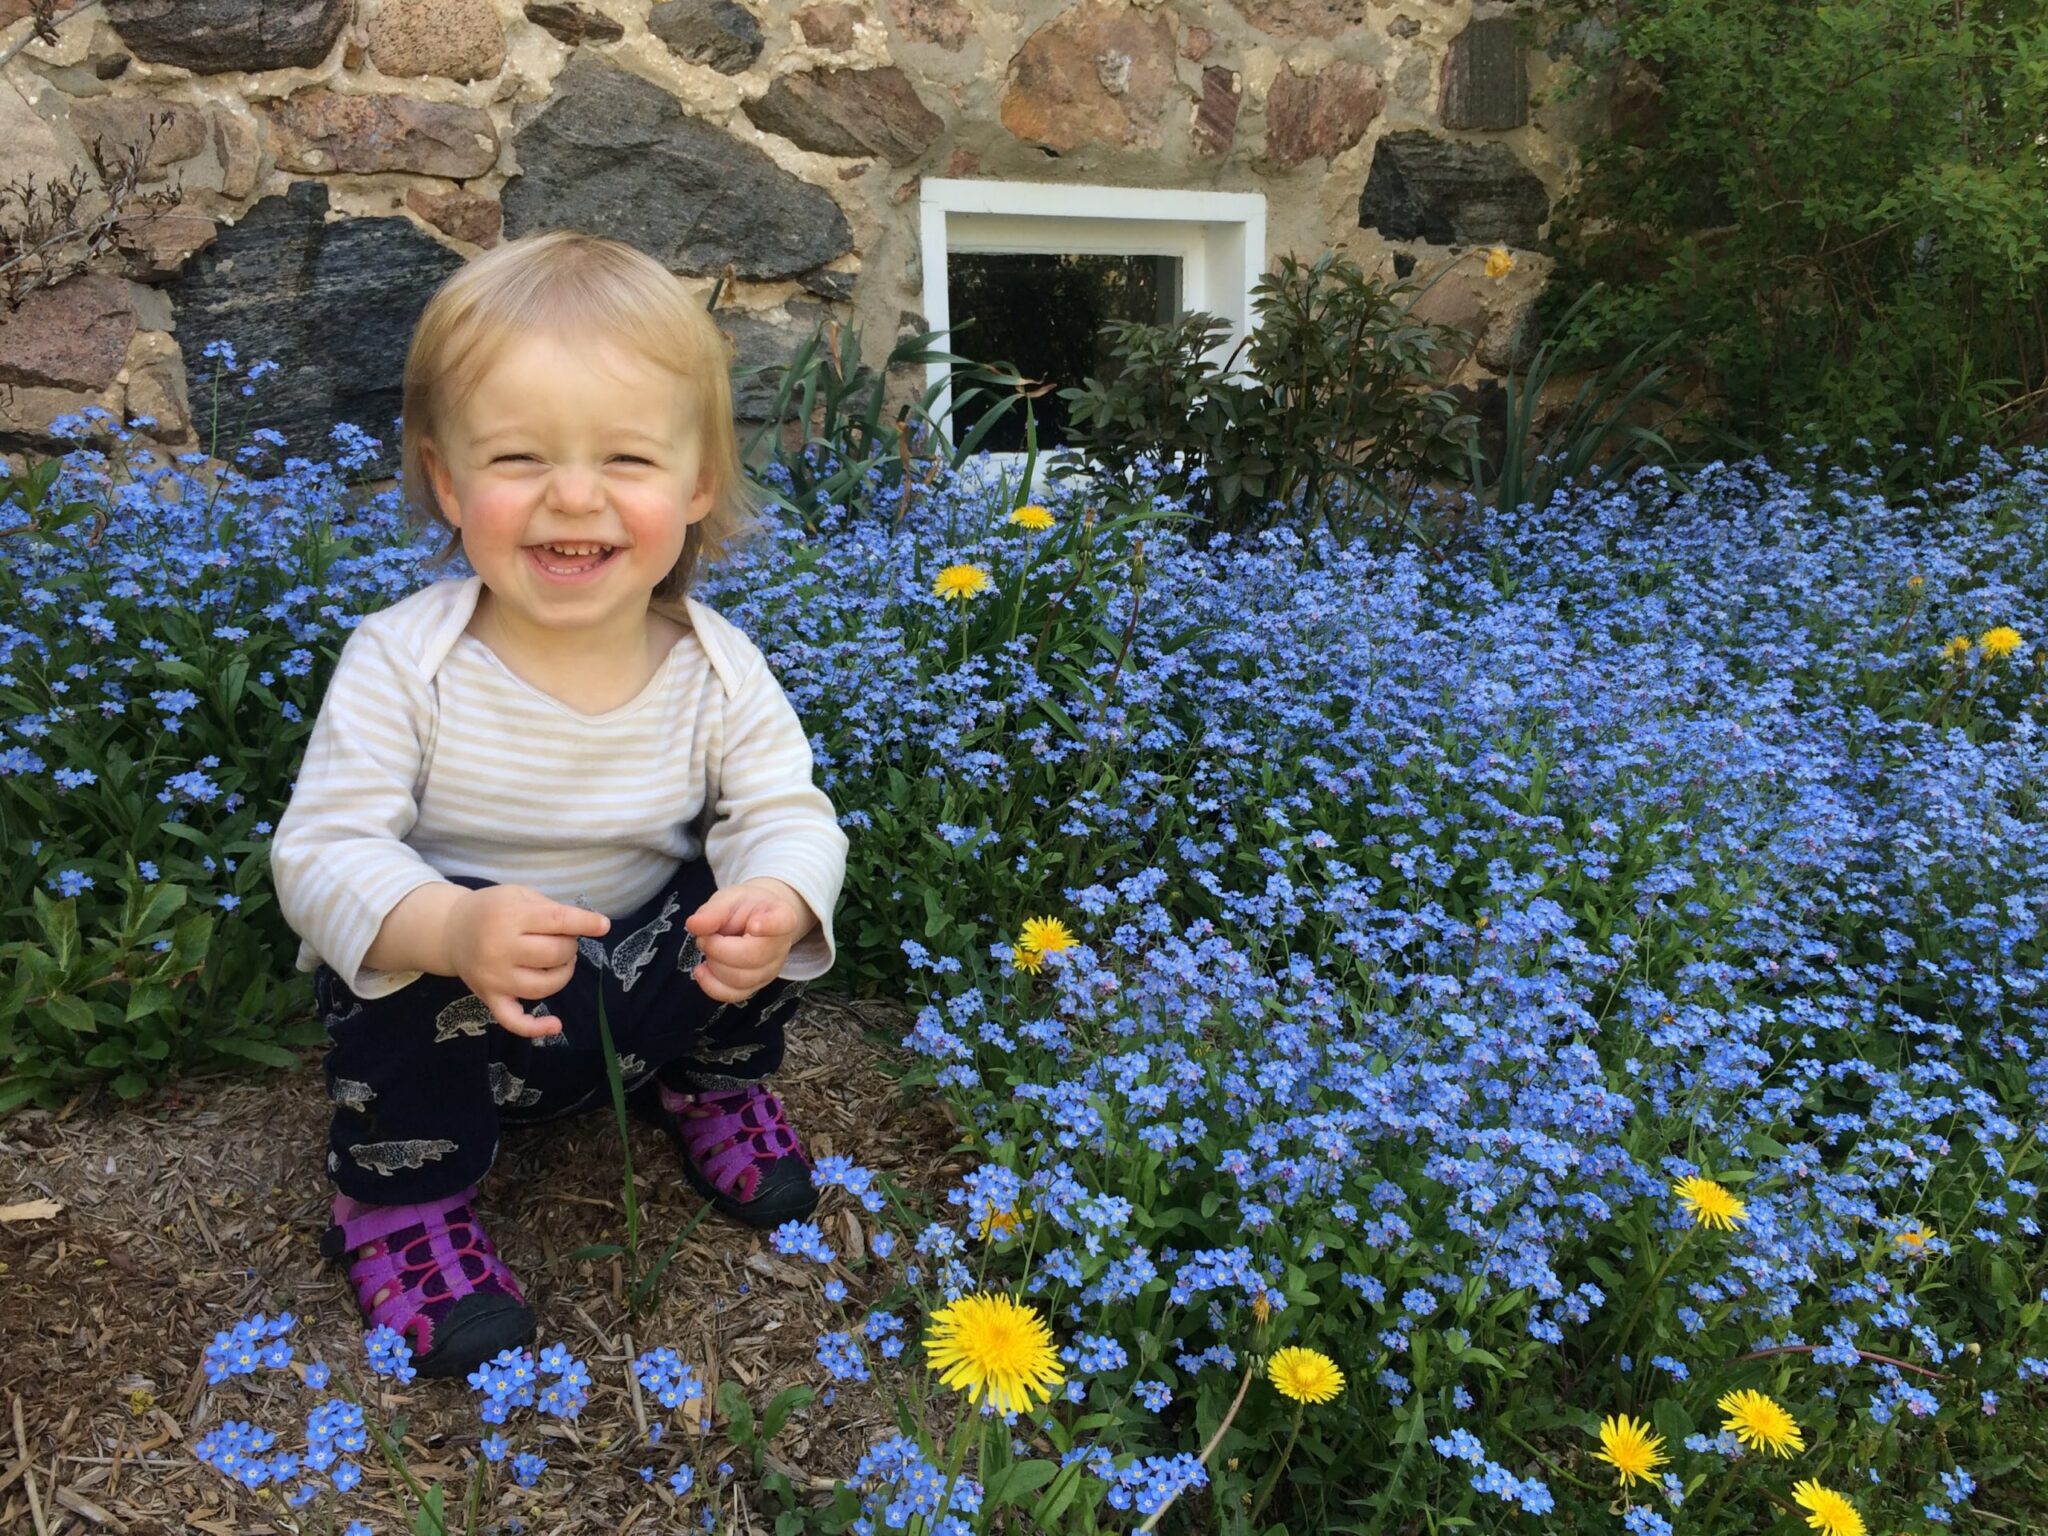 Oran Enns with the forget-me-nots in bloom, May 2021. 